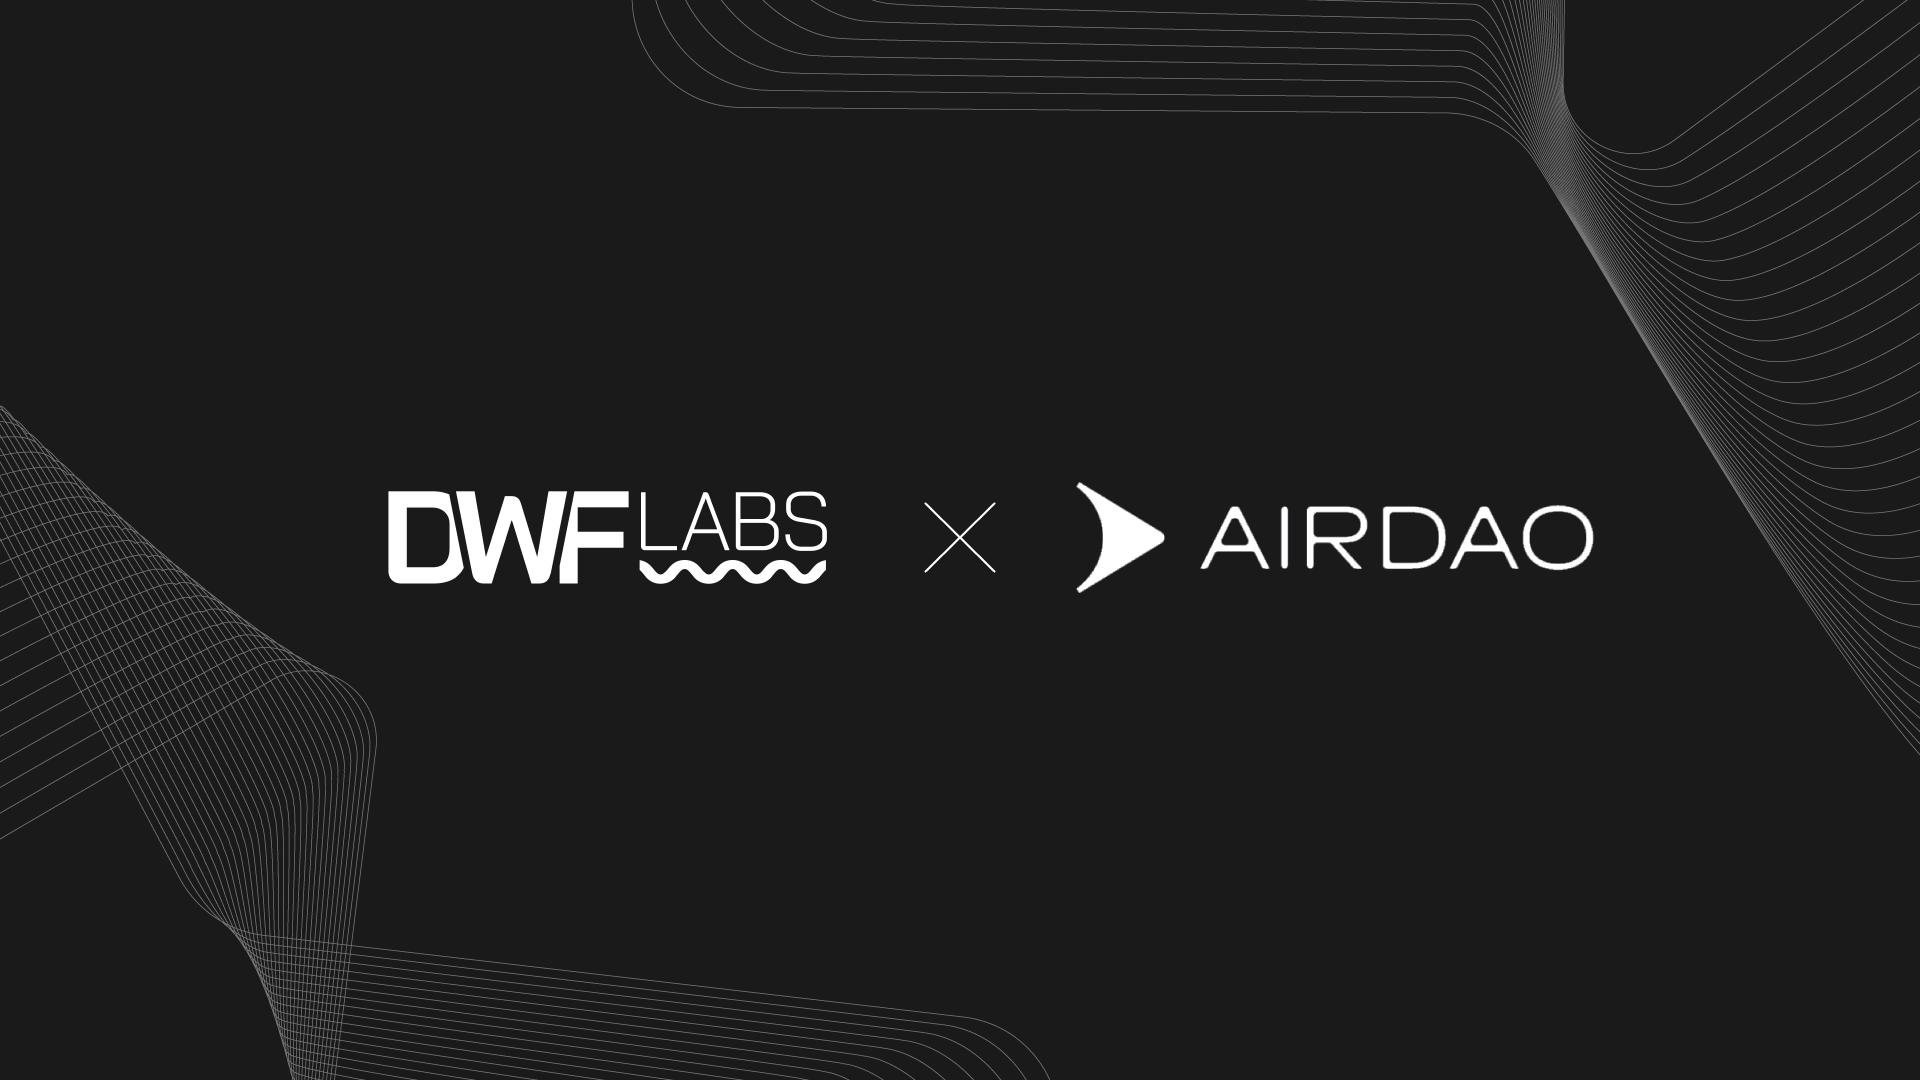 DWF Labs Invests $7.5 Million in AirDAO: A New Horizon for Web3 Innovation